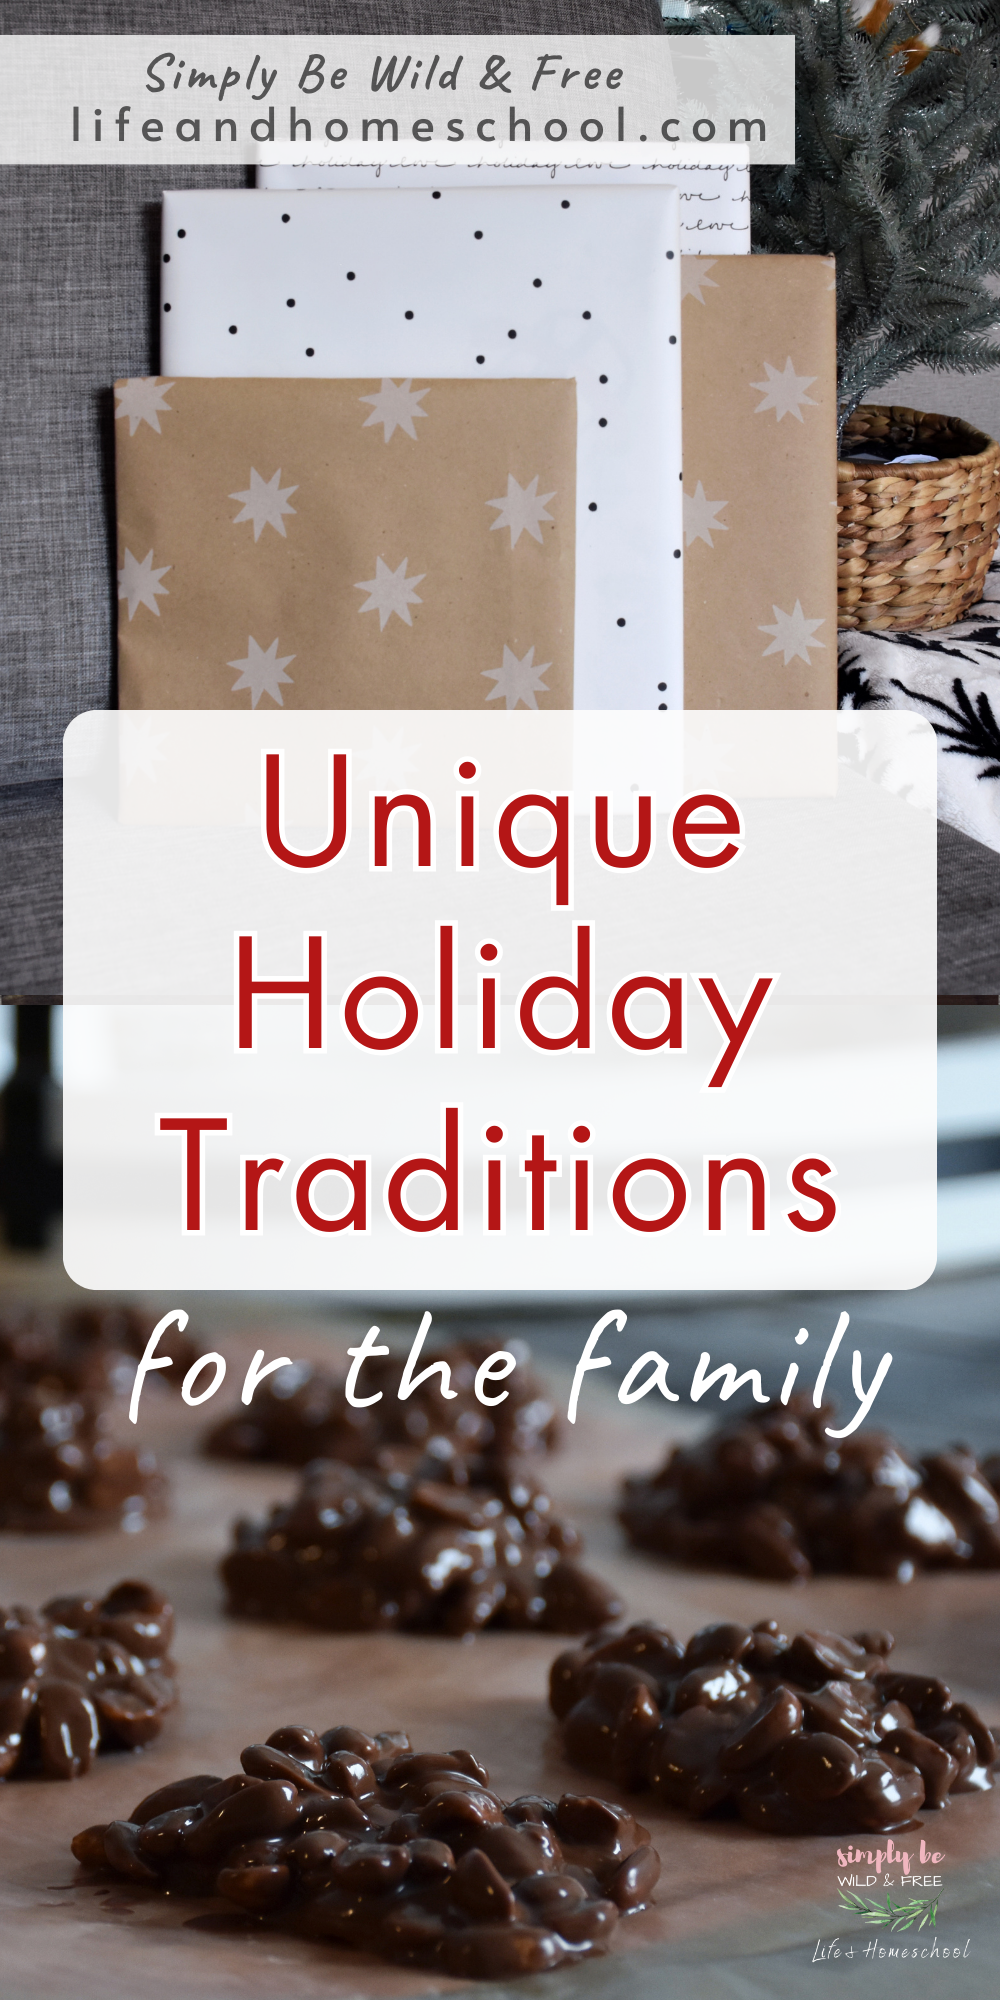 Simple Holiday Traditions